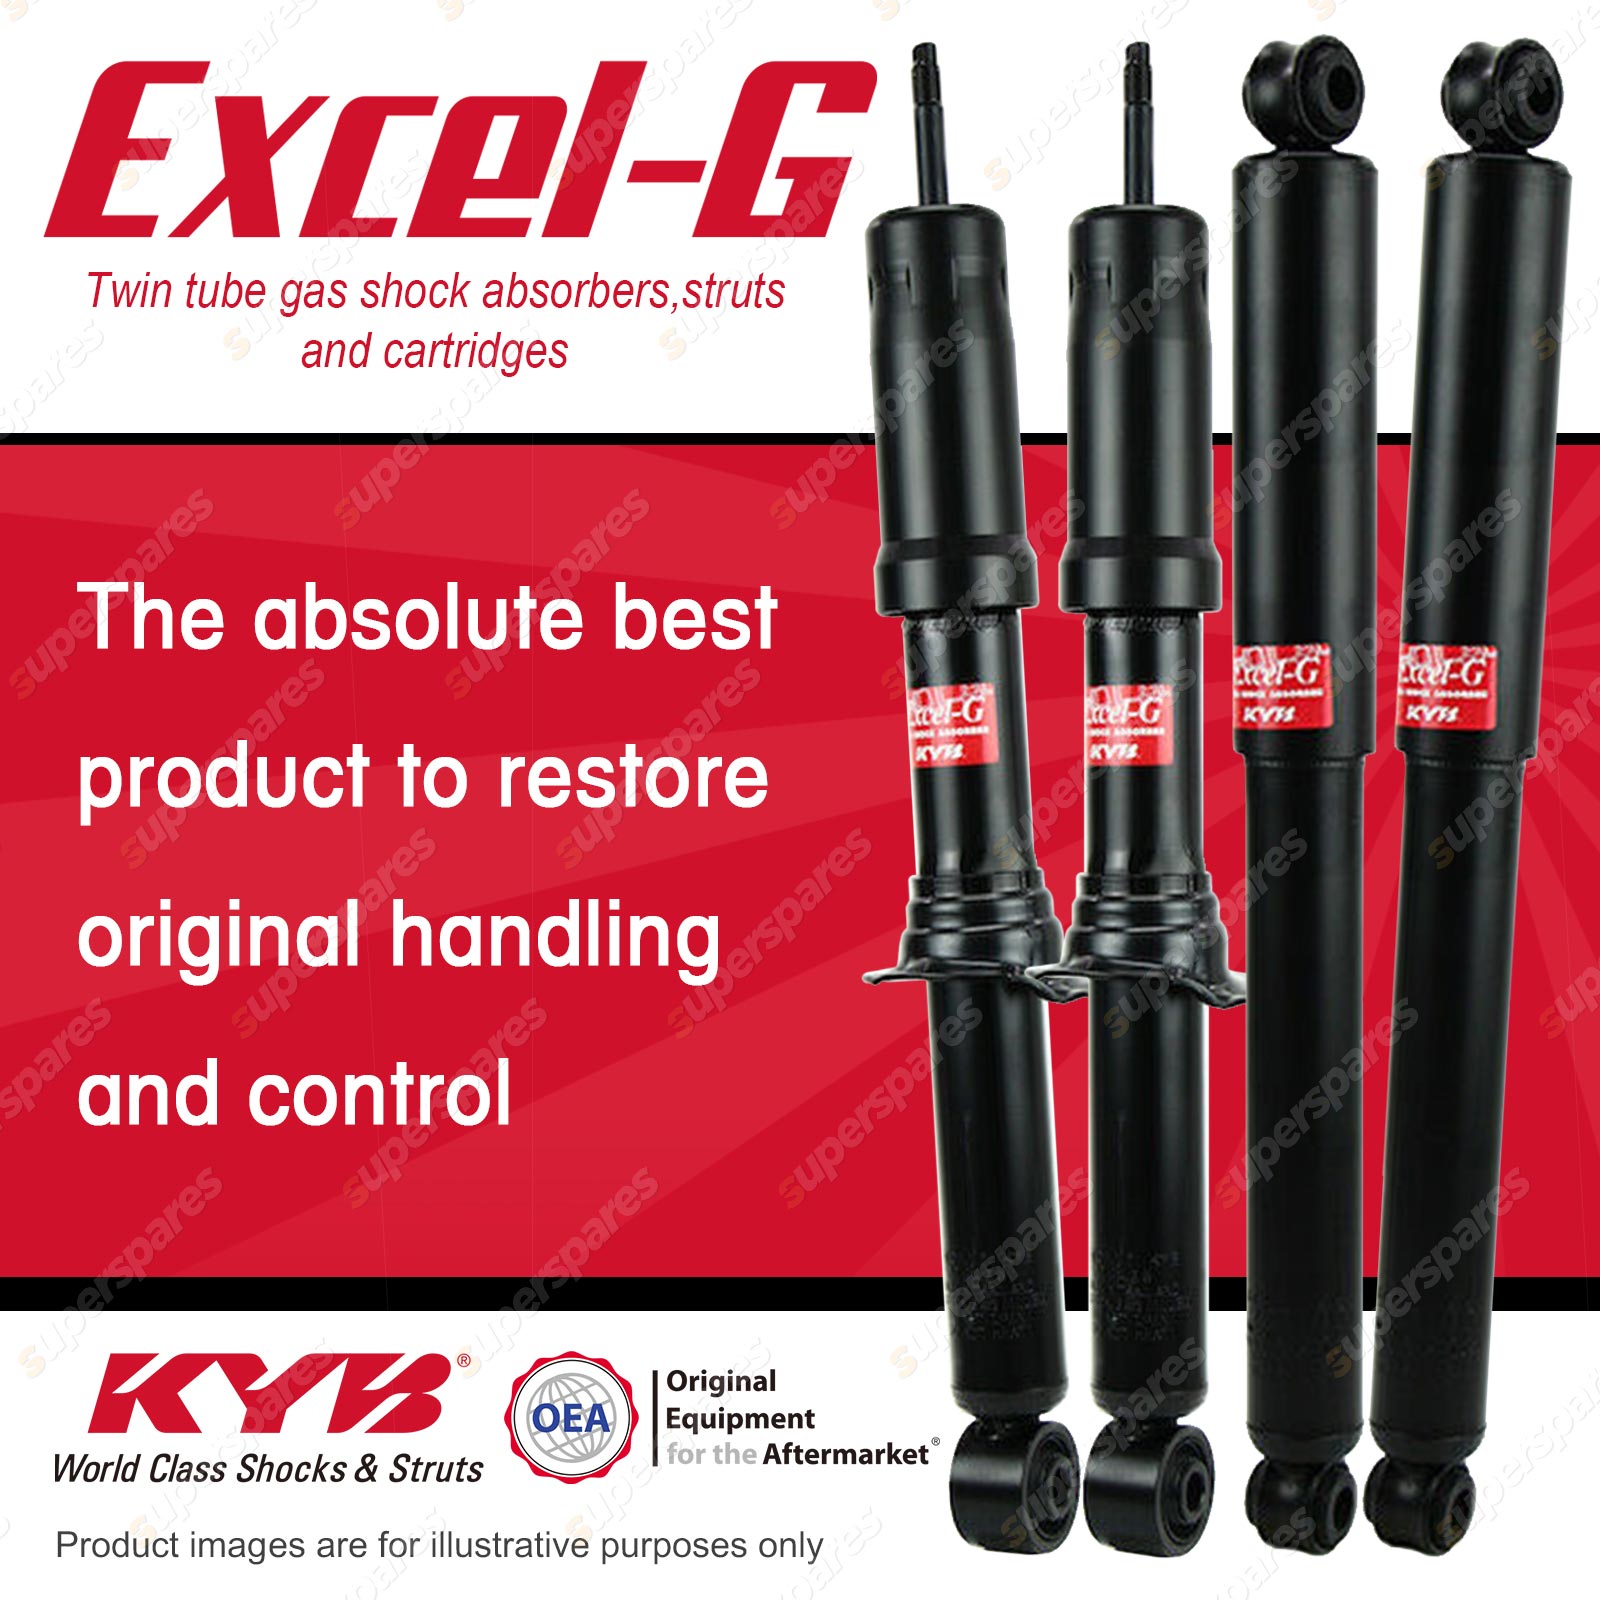 front-rear-kyb-excel-g-shock-absorbers-for-isuzu-d-max-tf-4jj1tcx-3-0